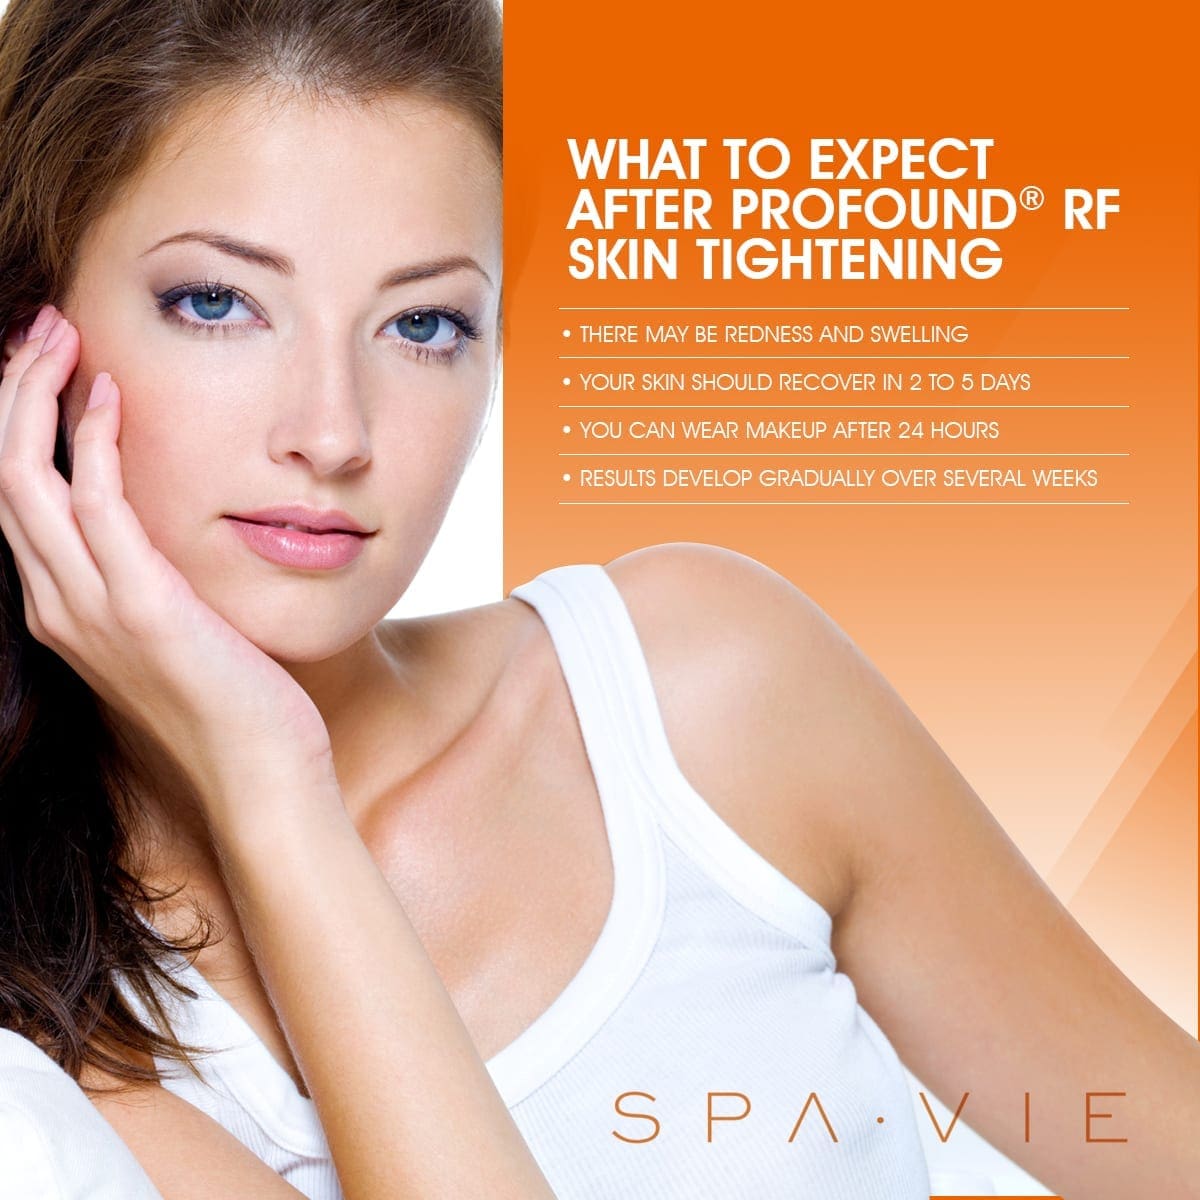 What To Expect After Profound® RF Skin Tightening [Infographic]